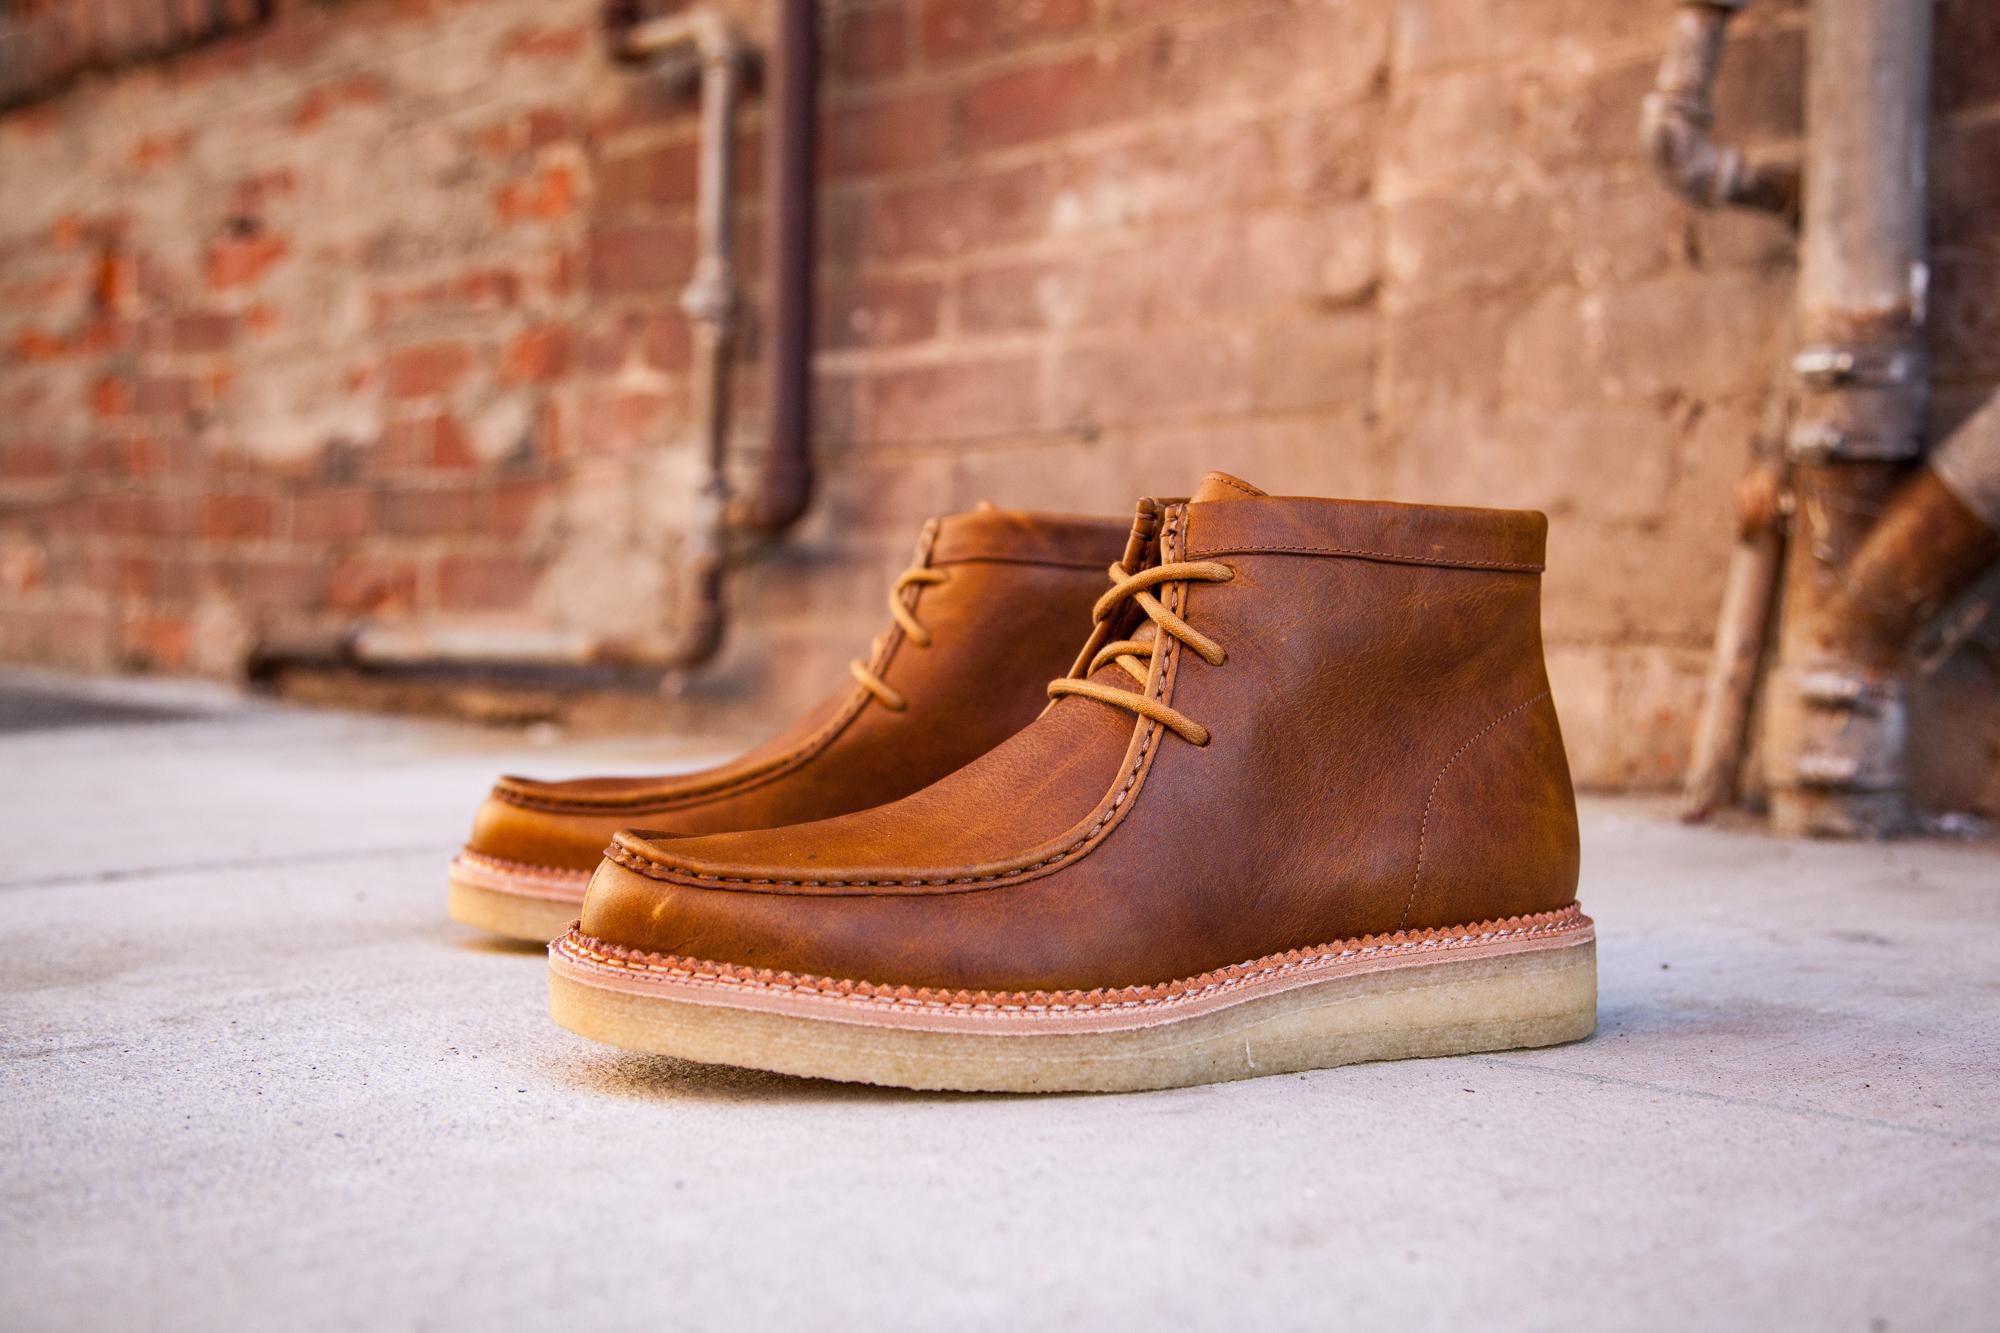 BAIT on X: "Clarks Men's Hike in bronze and brown leather is in sizes 7-13 for $214 at http://t.co/EvFpdUgWTw" / X